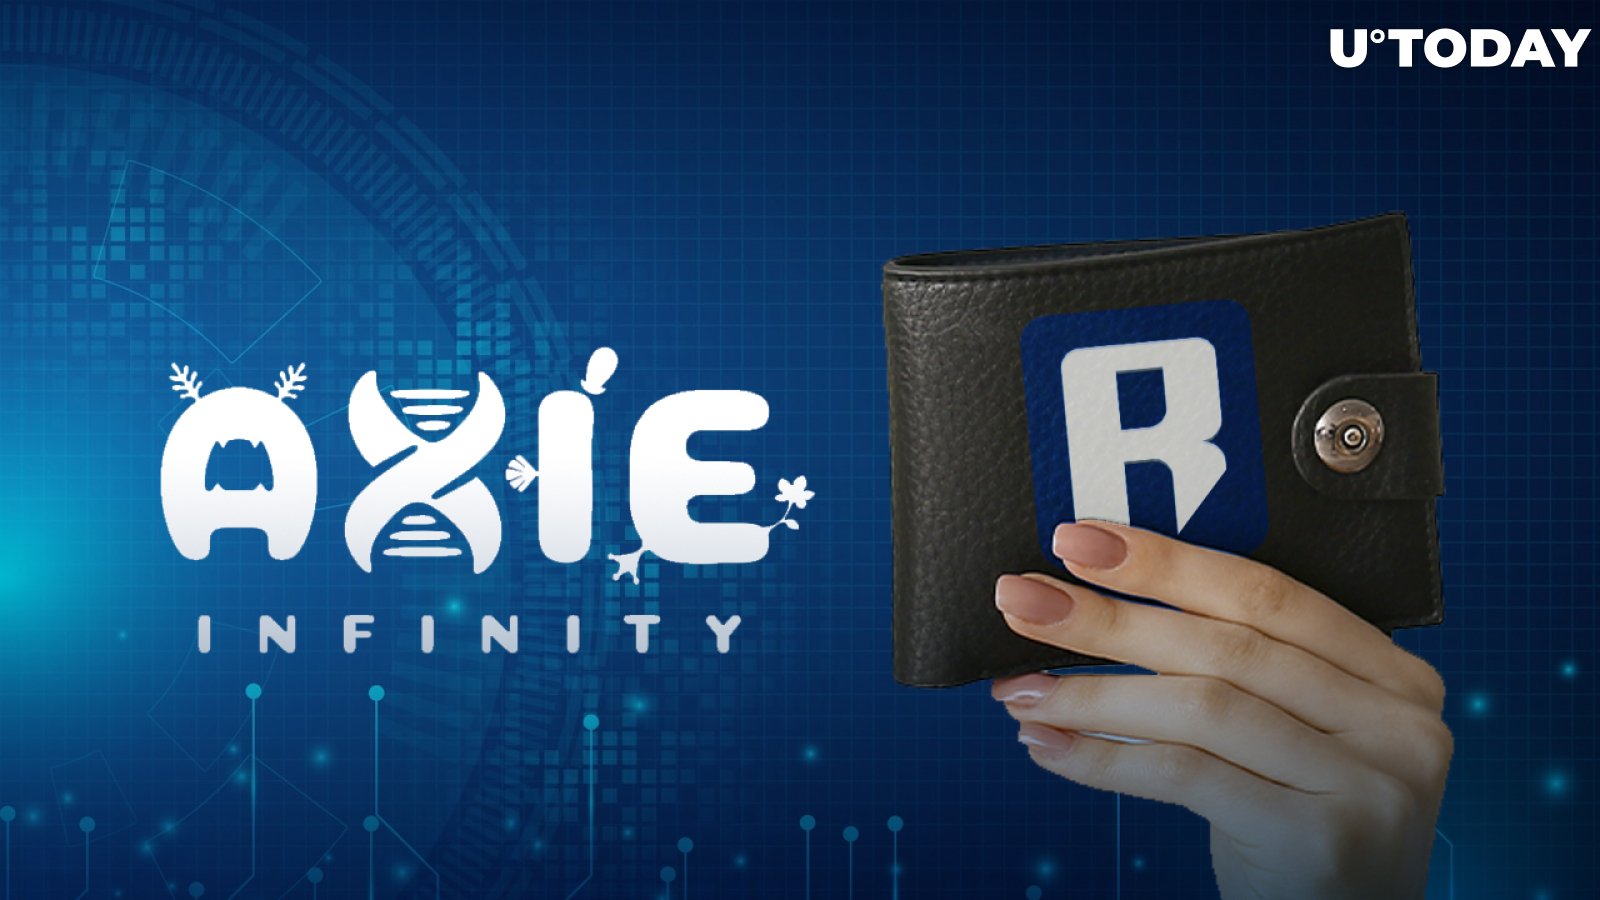 Axie Infinity Announces Ronin Wallet Update, Starts Compensating Losses from Hack